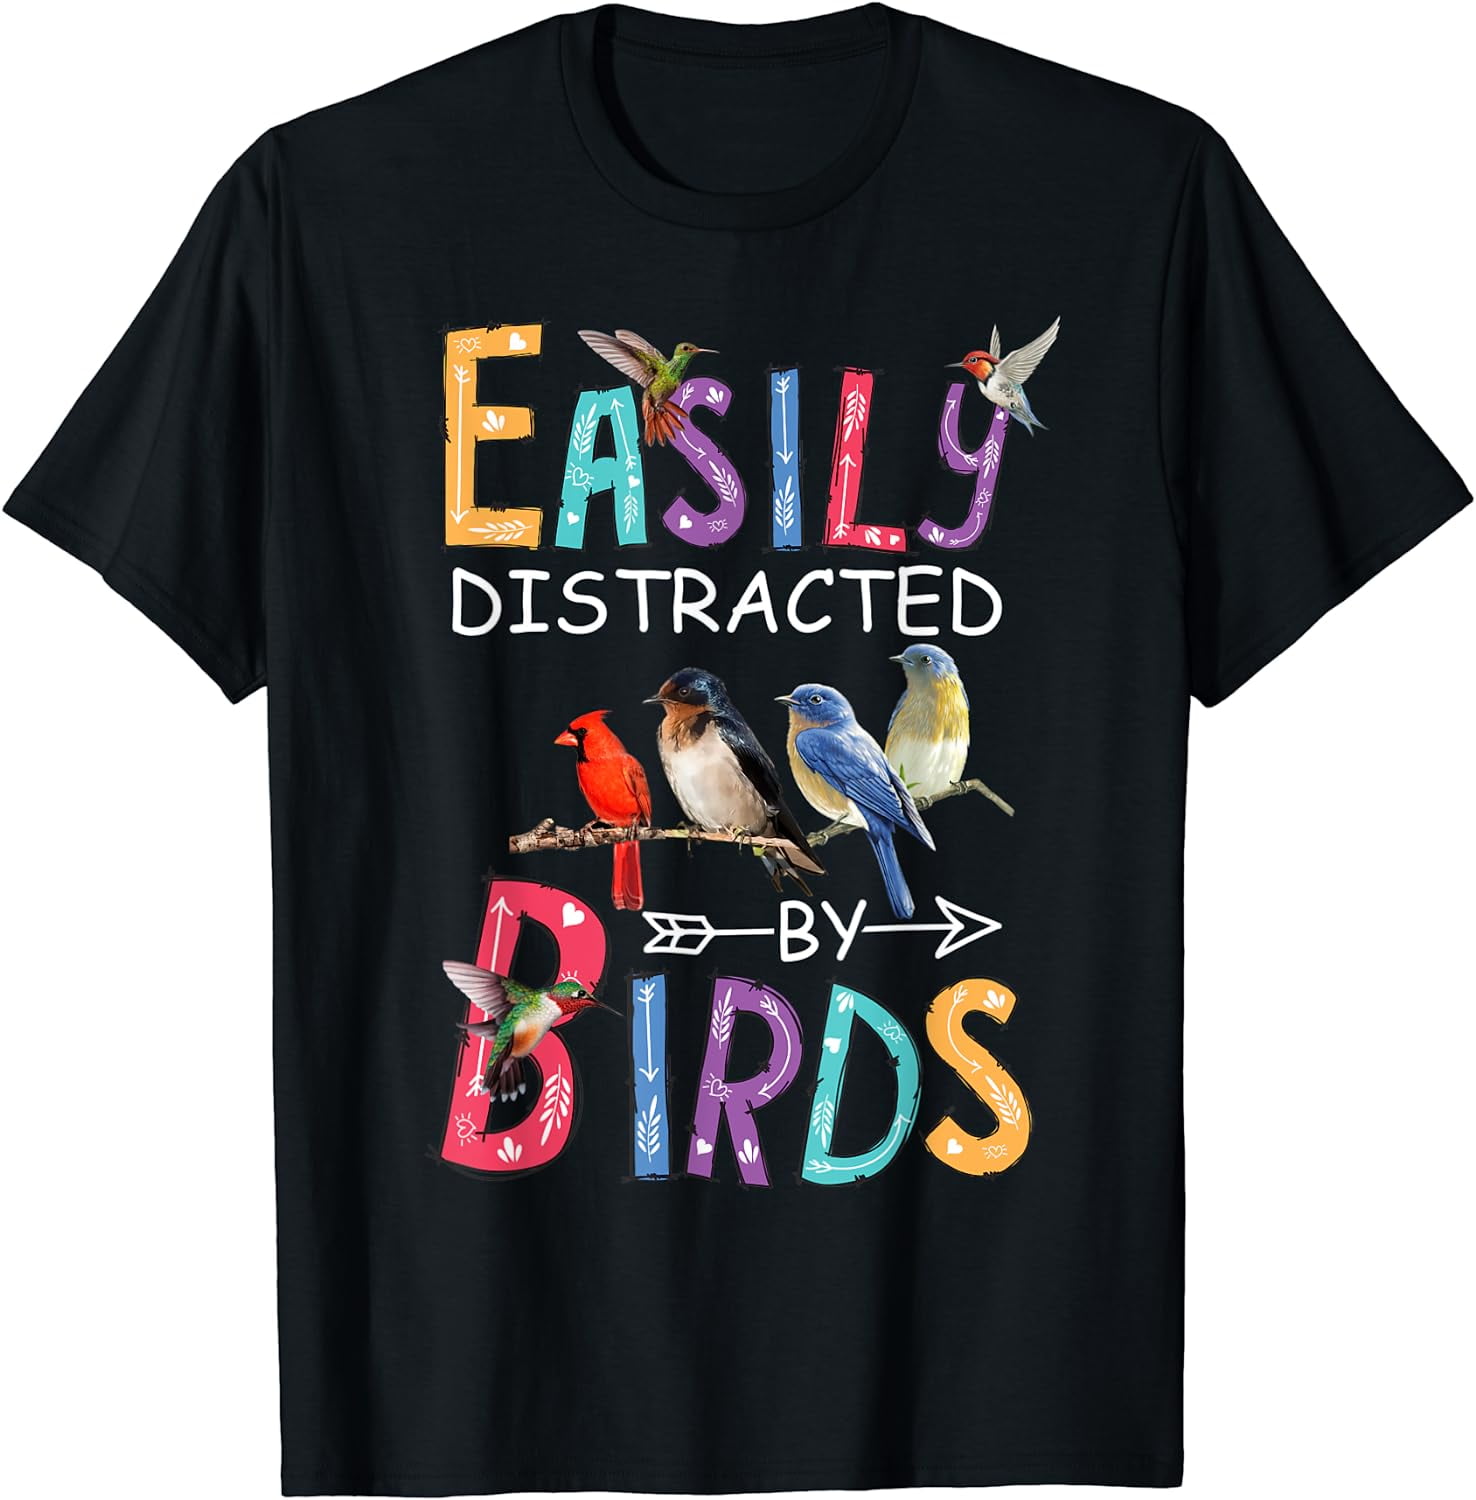 Easily Distracted By Birds Funny Bird T-Shirt Black Large - Walmart.com